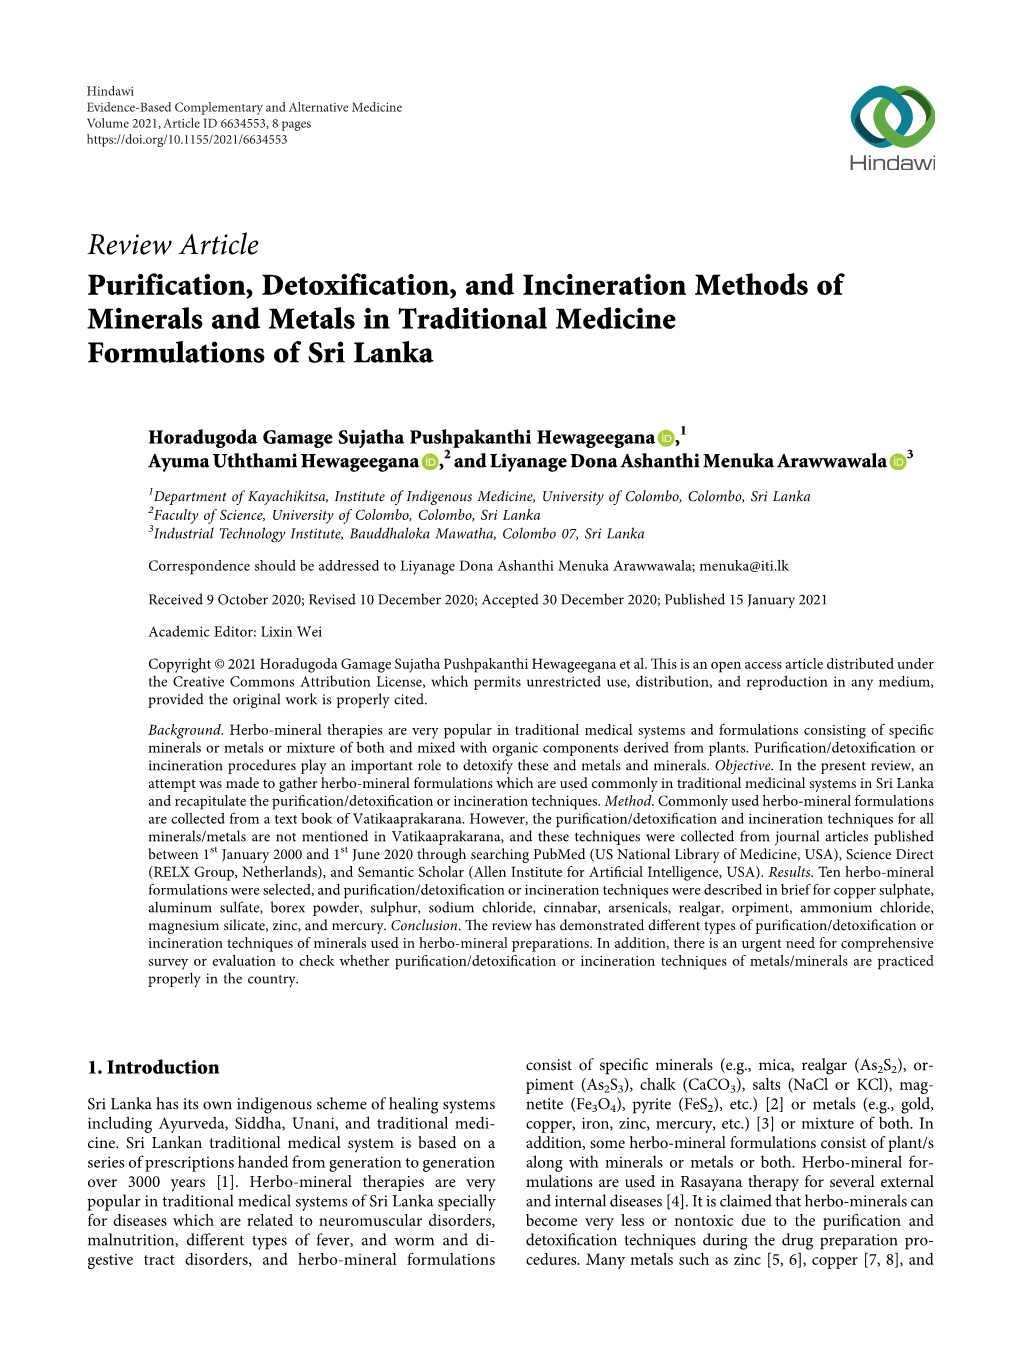 Review Article Purification, Detoxification, and Incineration Methods of Minerals and Metals in Traditional Medicine Formulations of Sri Lanka